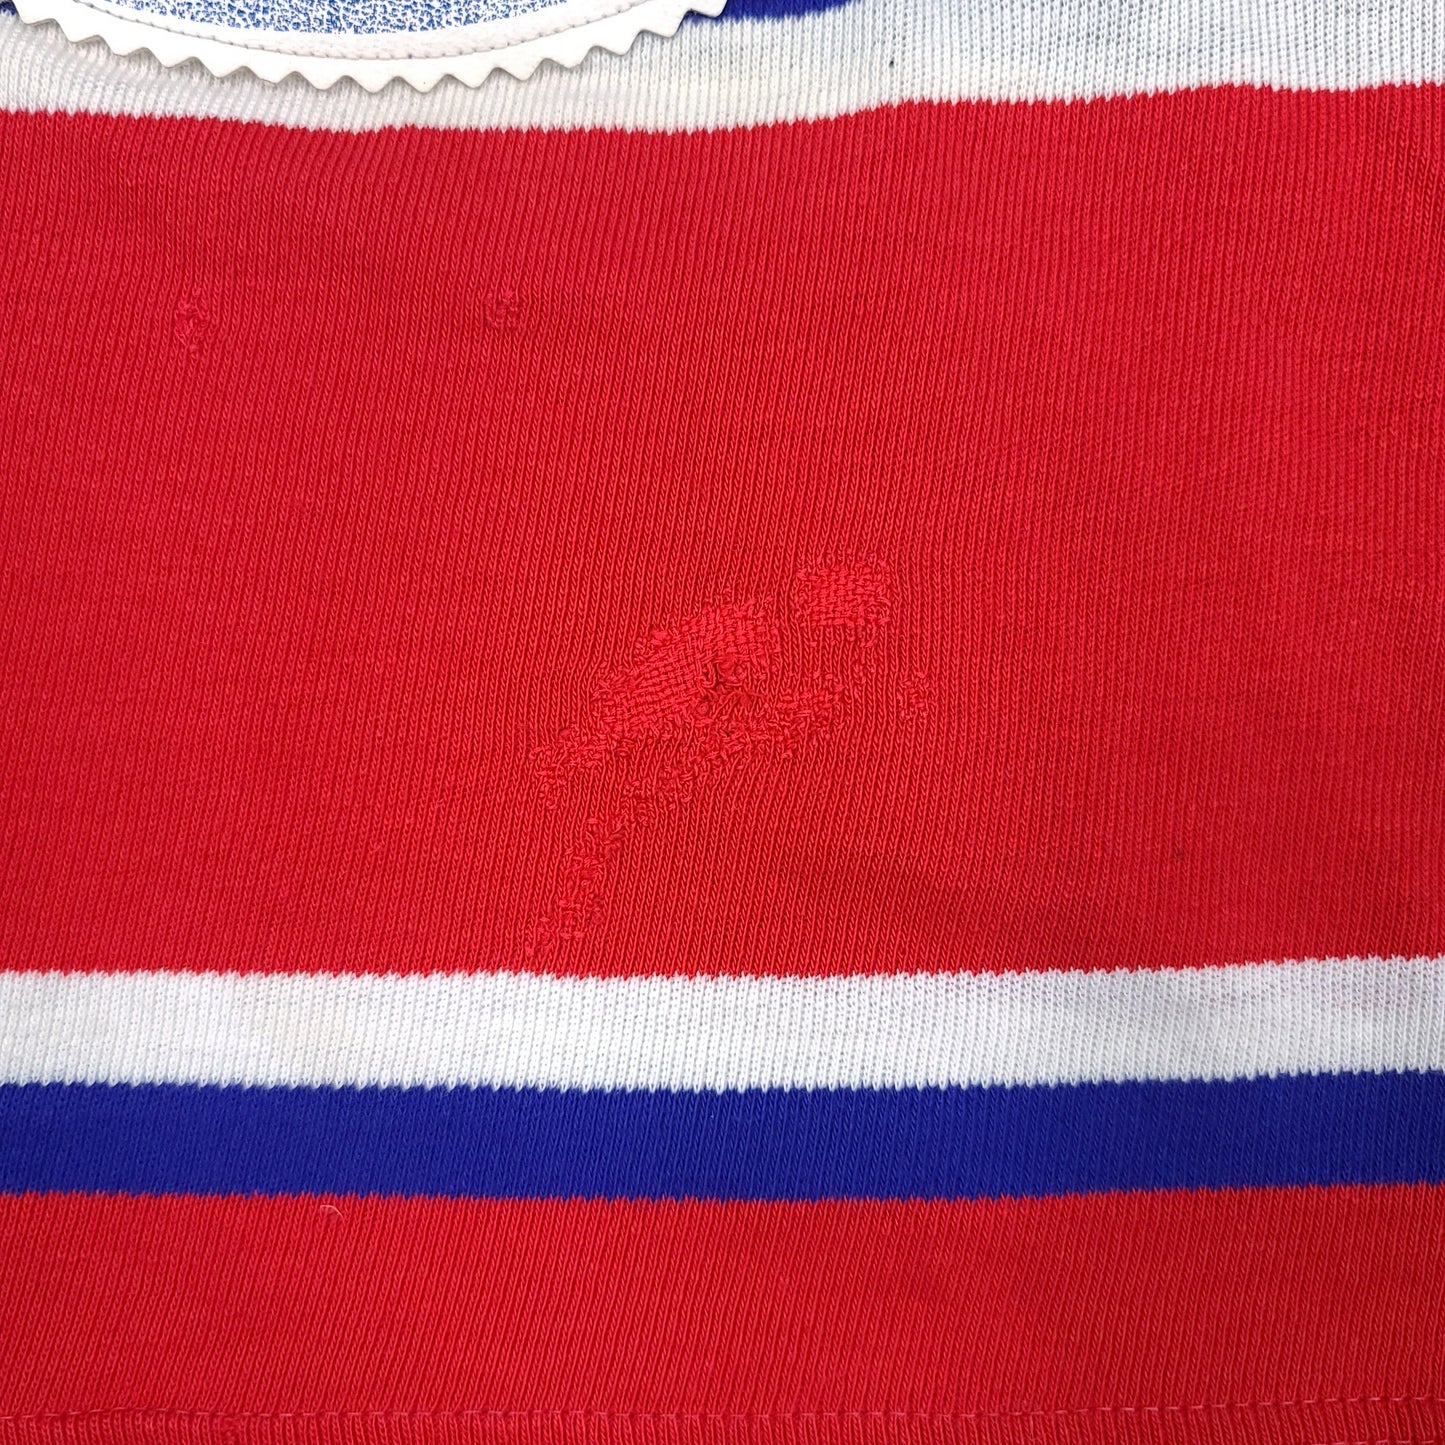 Vintage Montreal Canadians GCK Youth Hockey Jersey